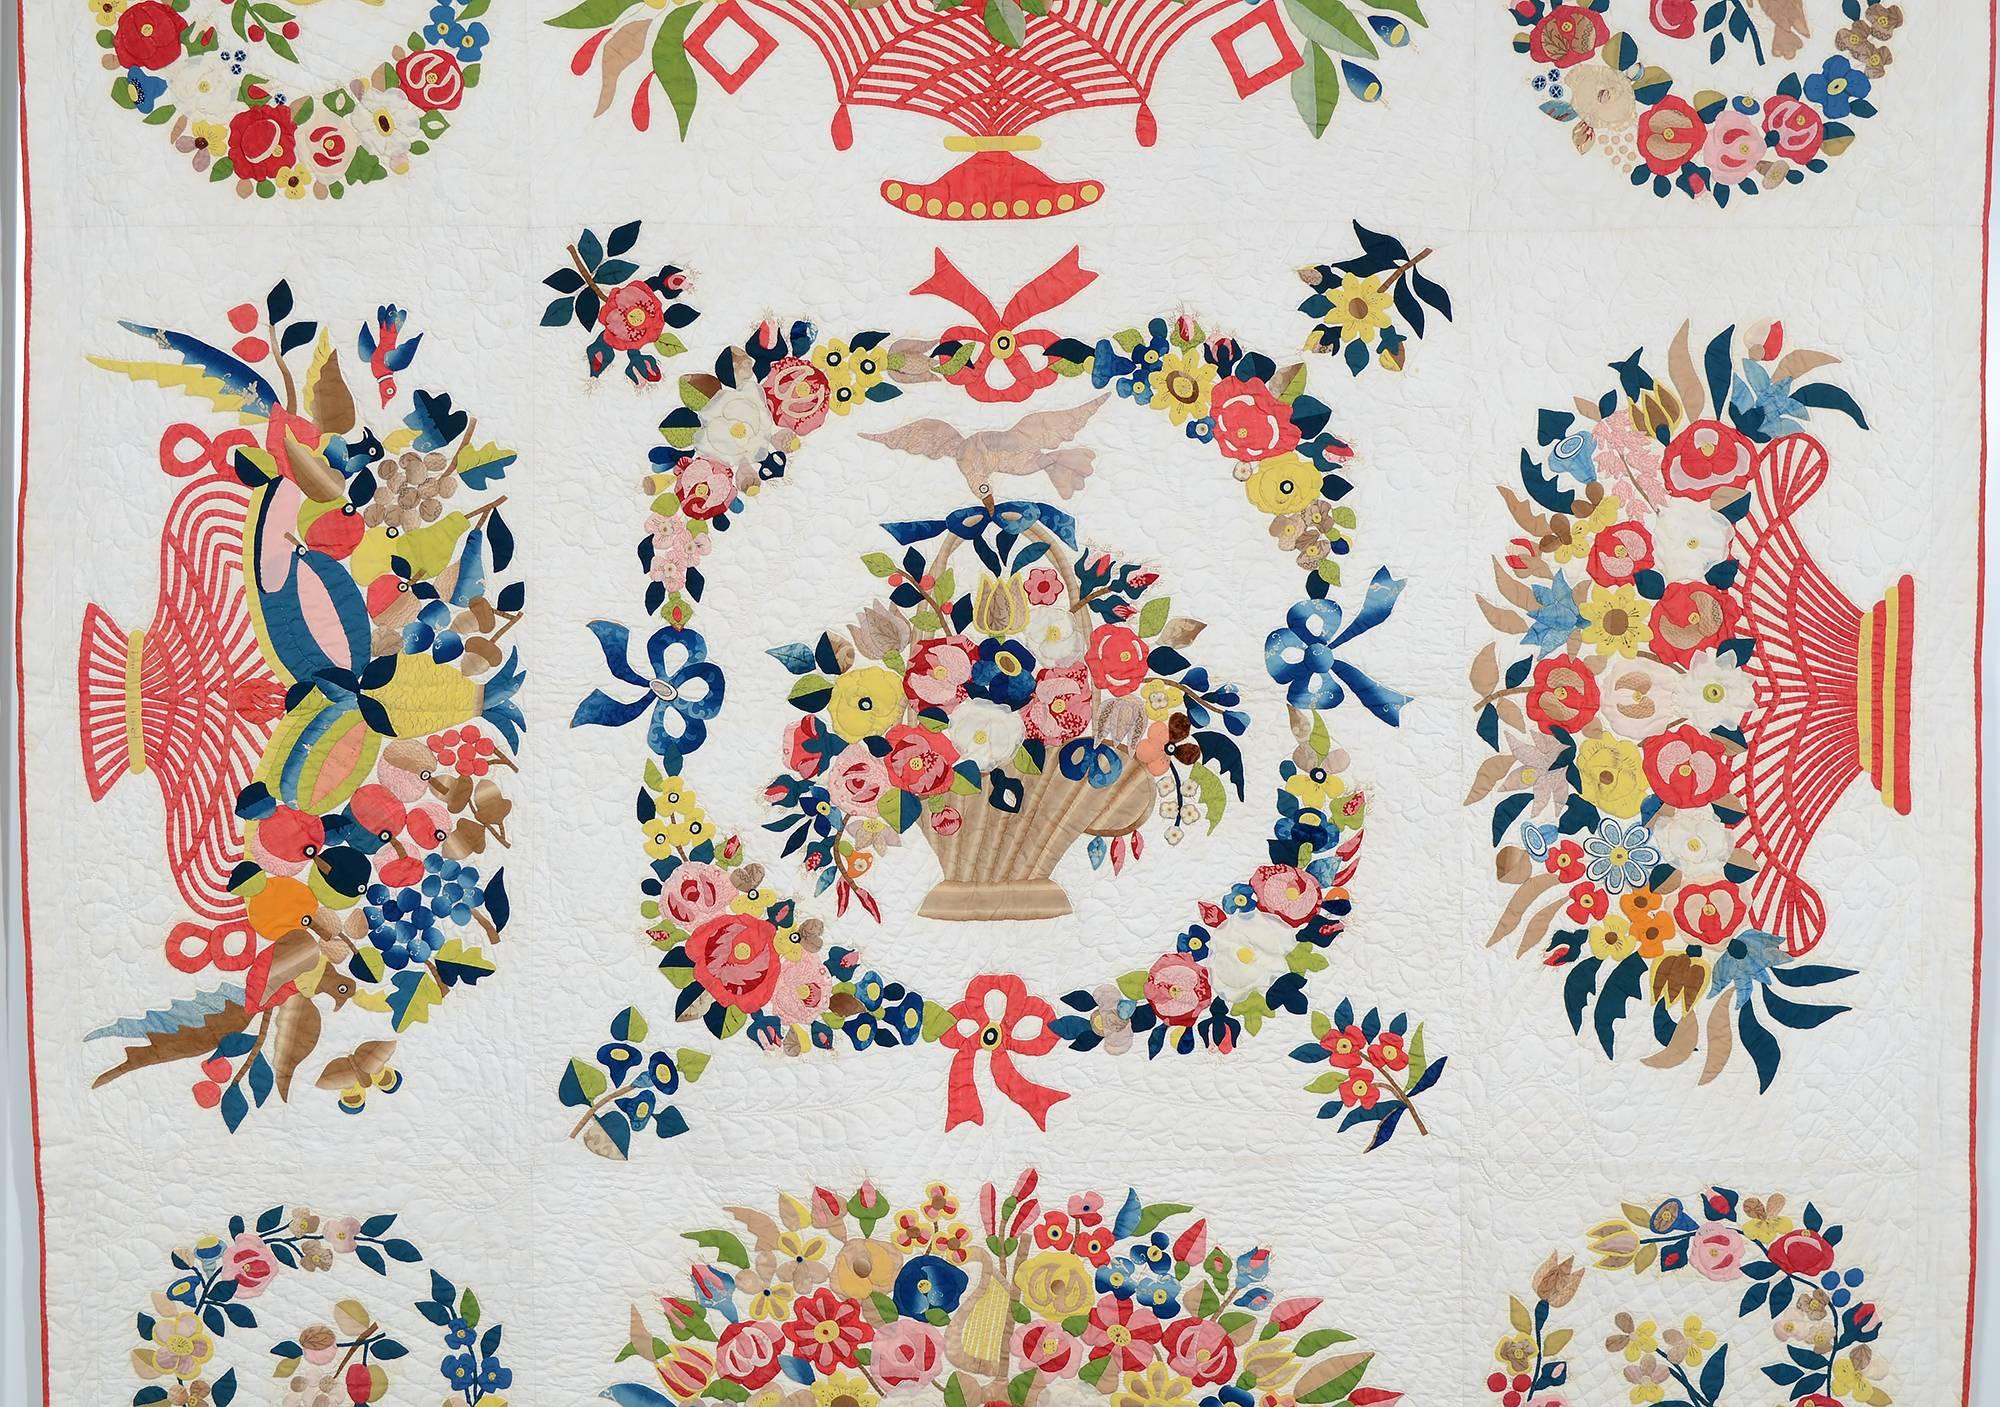 This elaborate Baltimore Album quilt is one of the finest examples of its type. All nine appliqued blocks seem to by the hand of Mary Evans who was known for creating the most elaborate, high style album quilt blocks.
Five different floral baskets